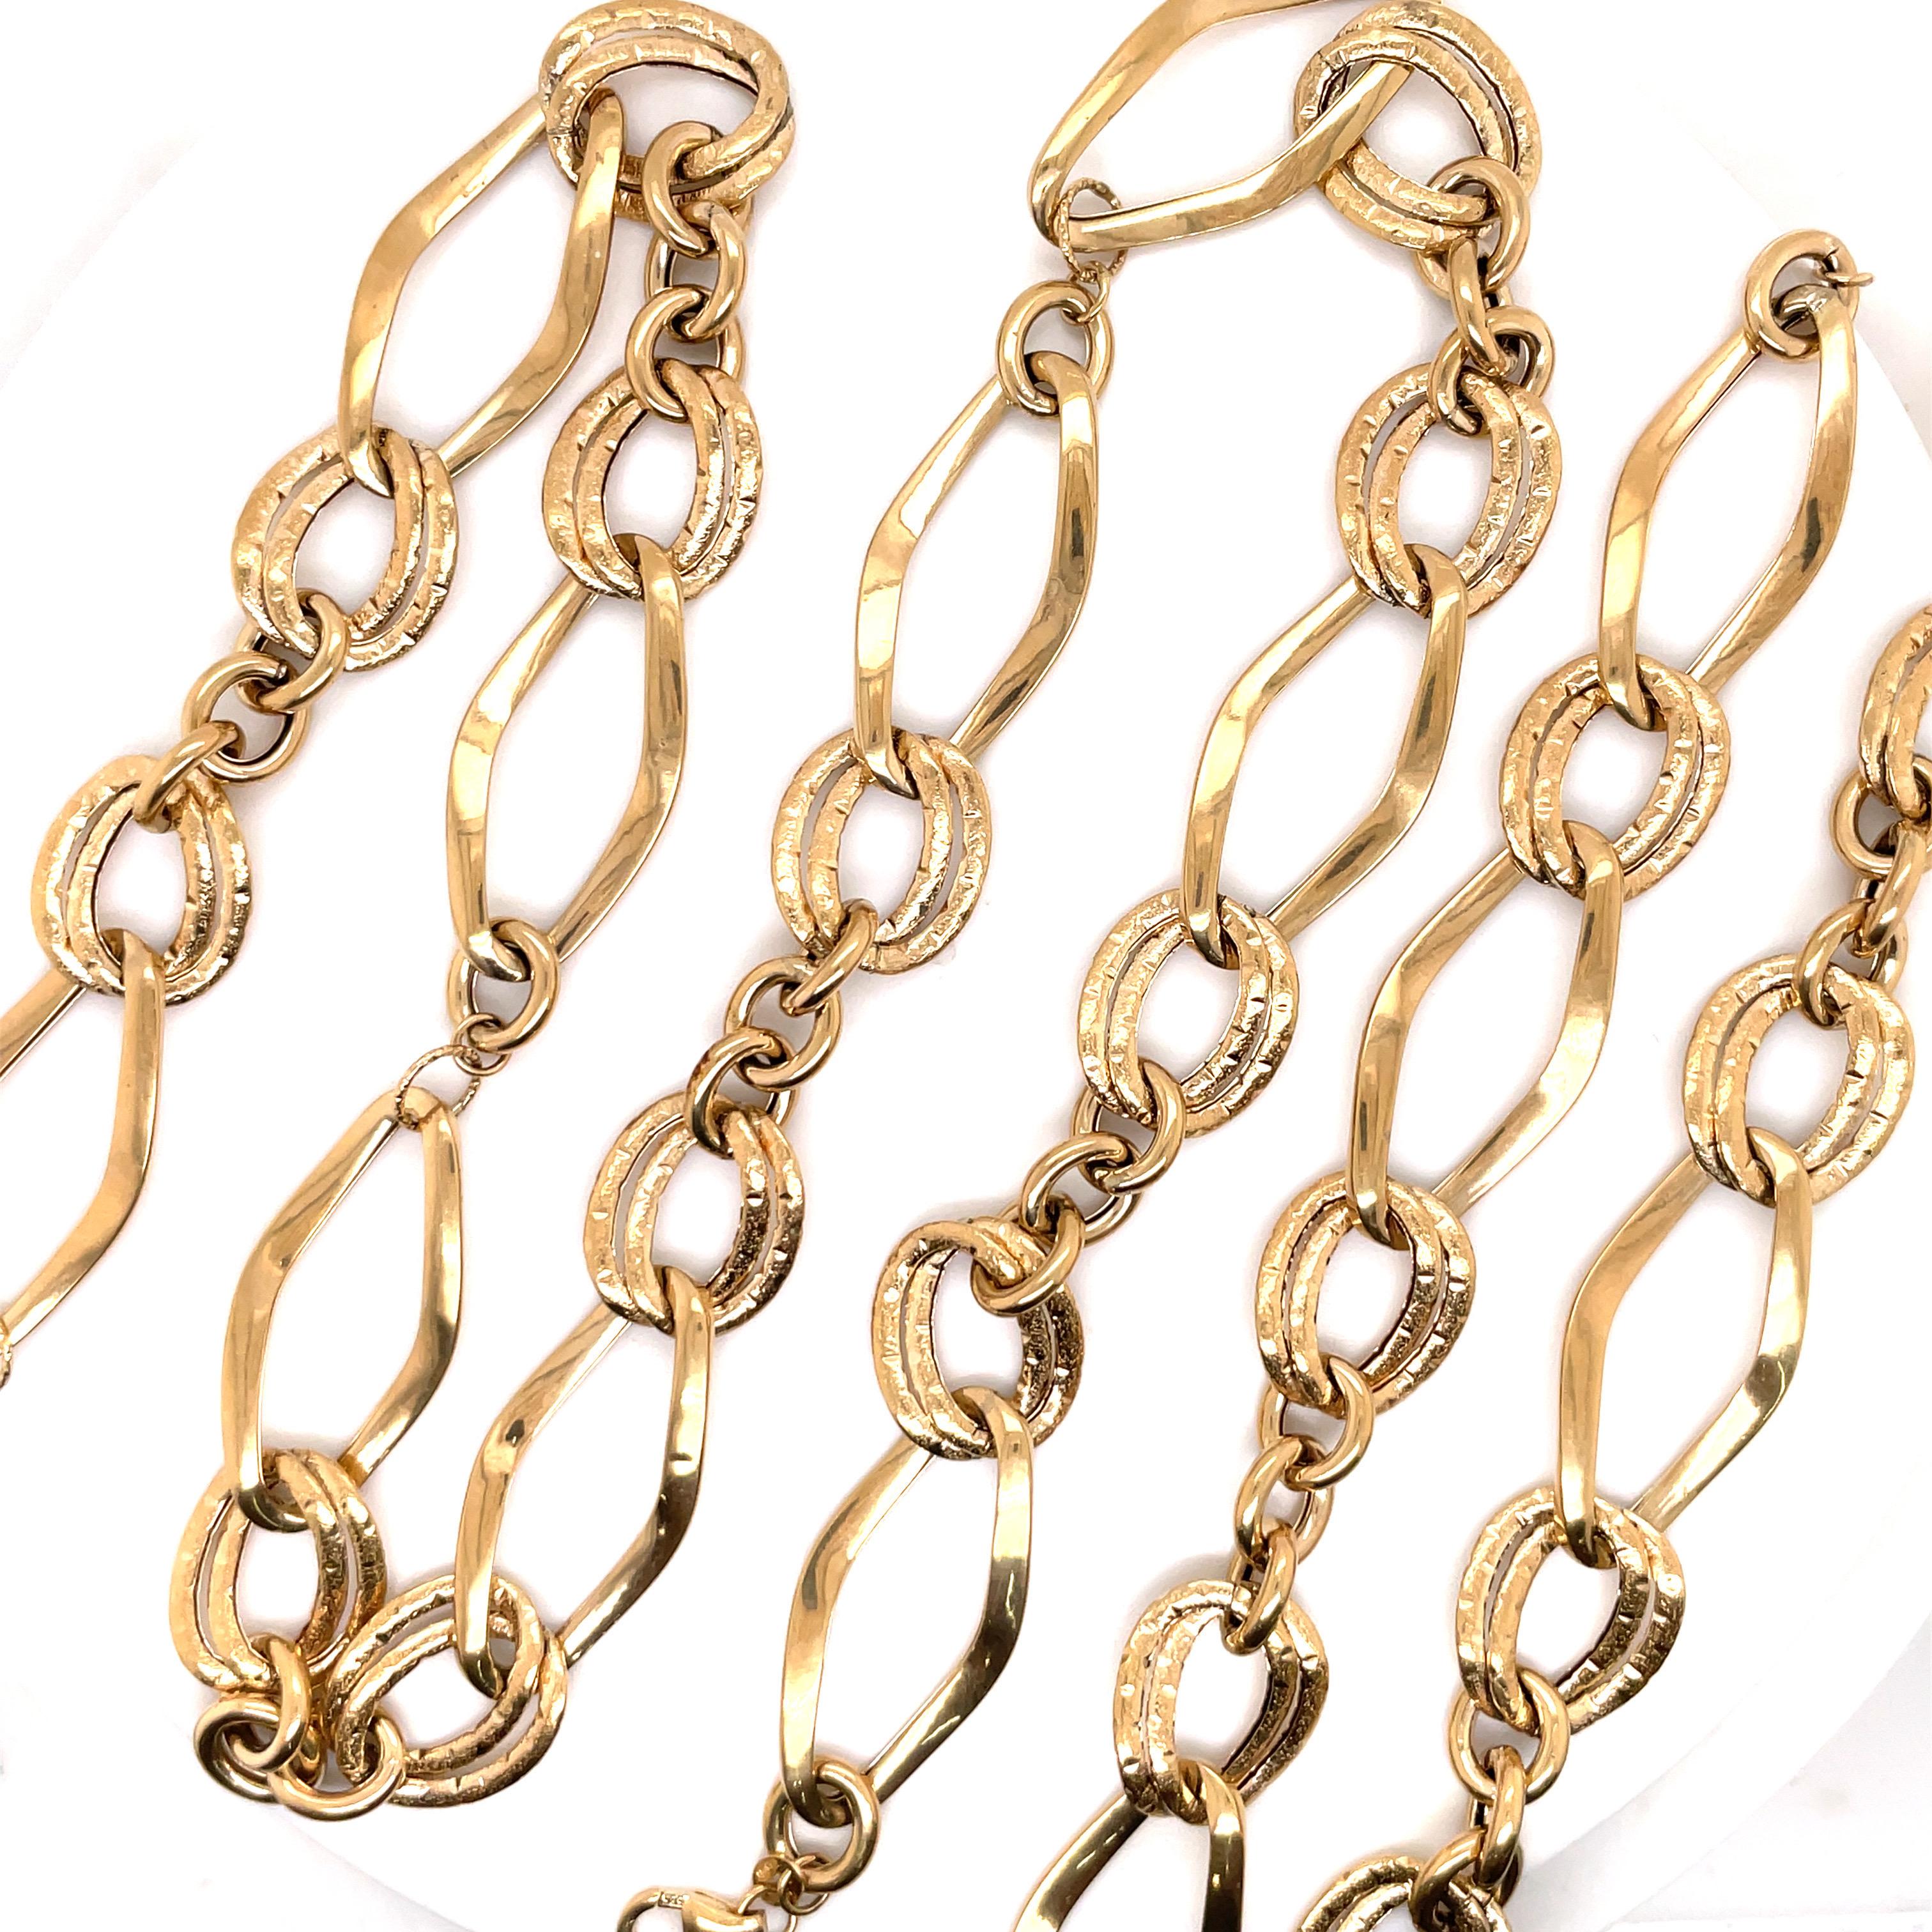 14 Karat Yellow Gold link set featuring one necklace measuring 21.5 inches and two bracelets; one measuring 6.5 inches and the other 7.13 inches. The whole set can be combined into a 37 Inch necklace or the two bracelets making collar necklace. Made